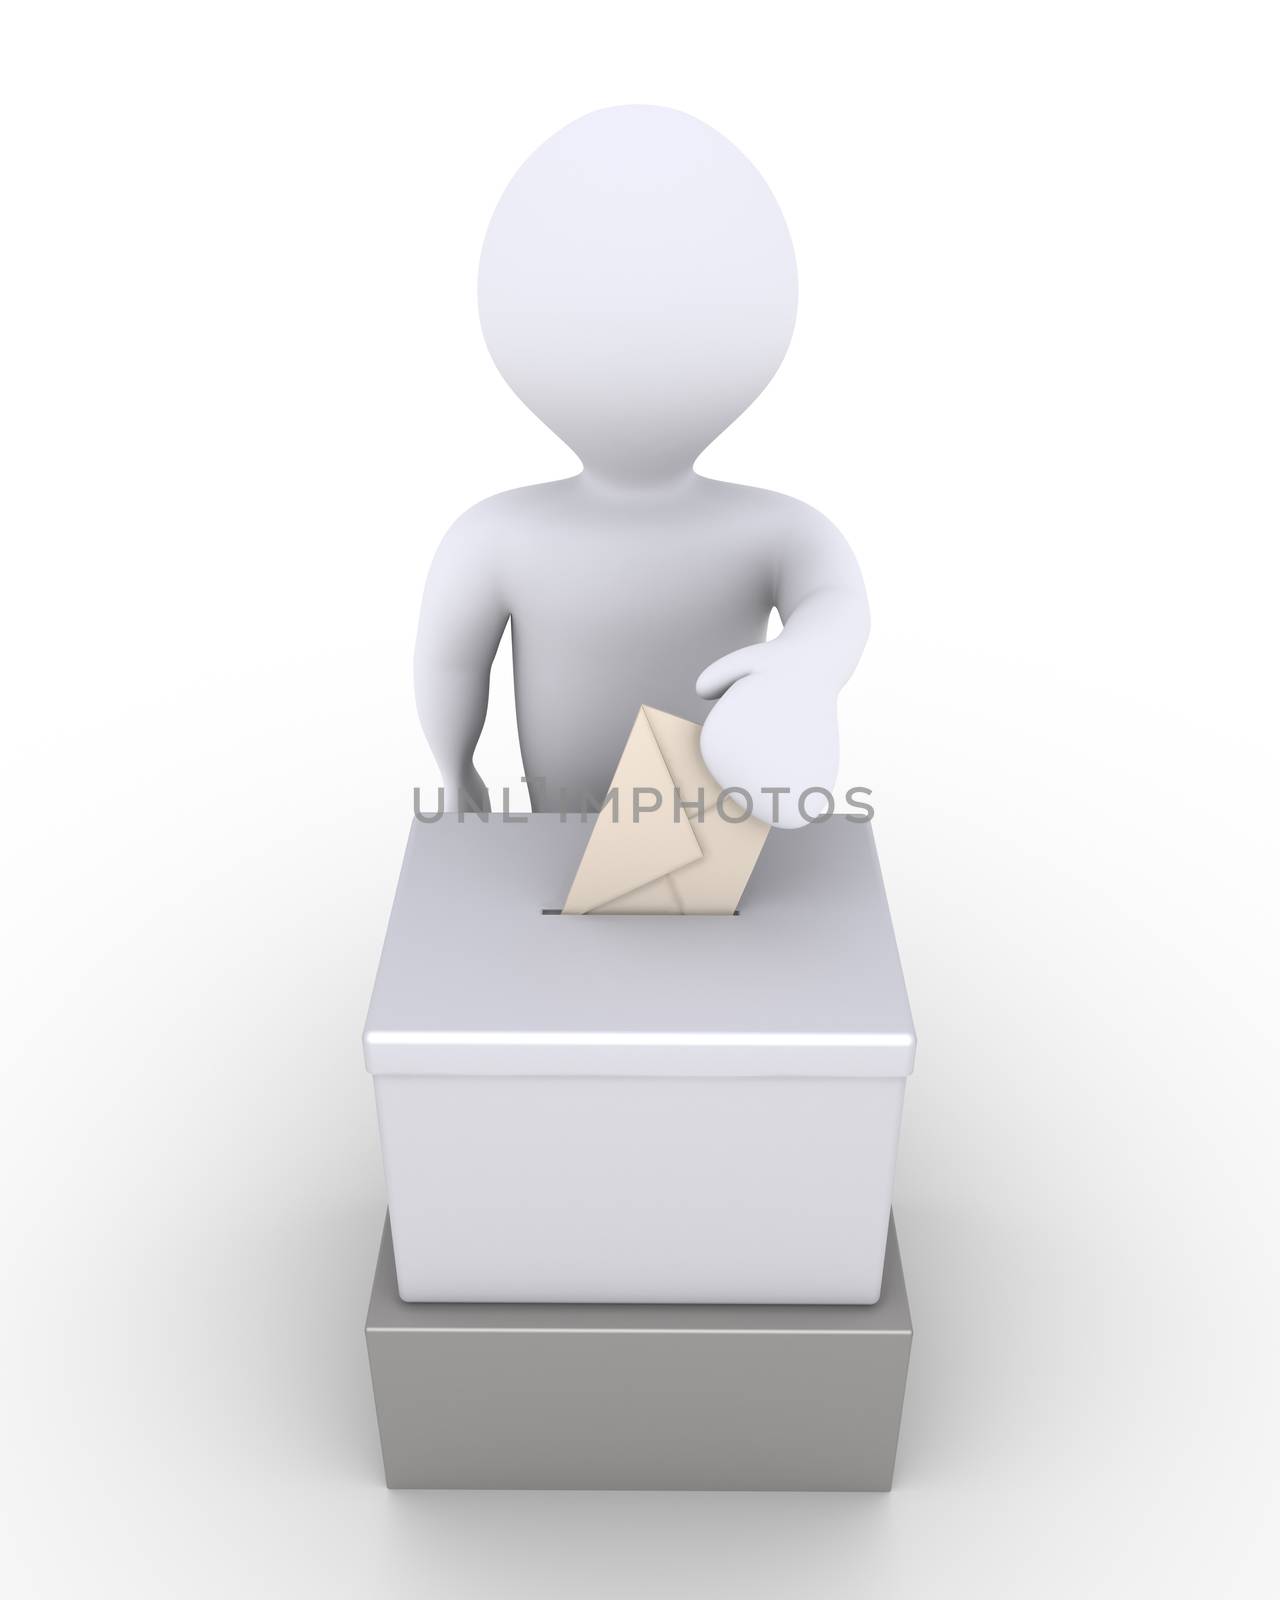 Person before a ballot box is voting by 6kor3dos